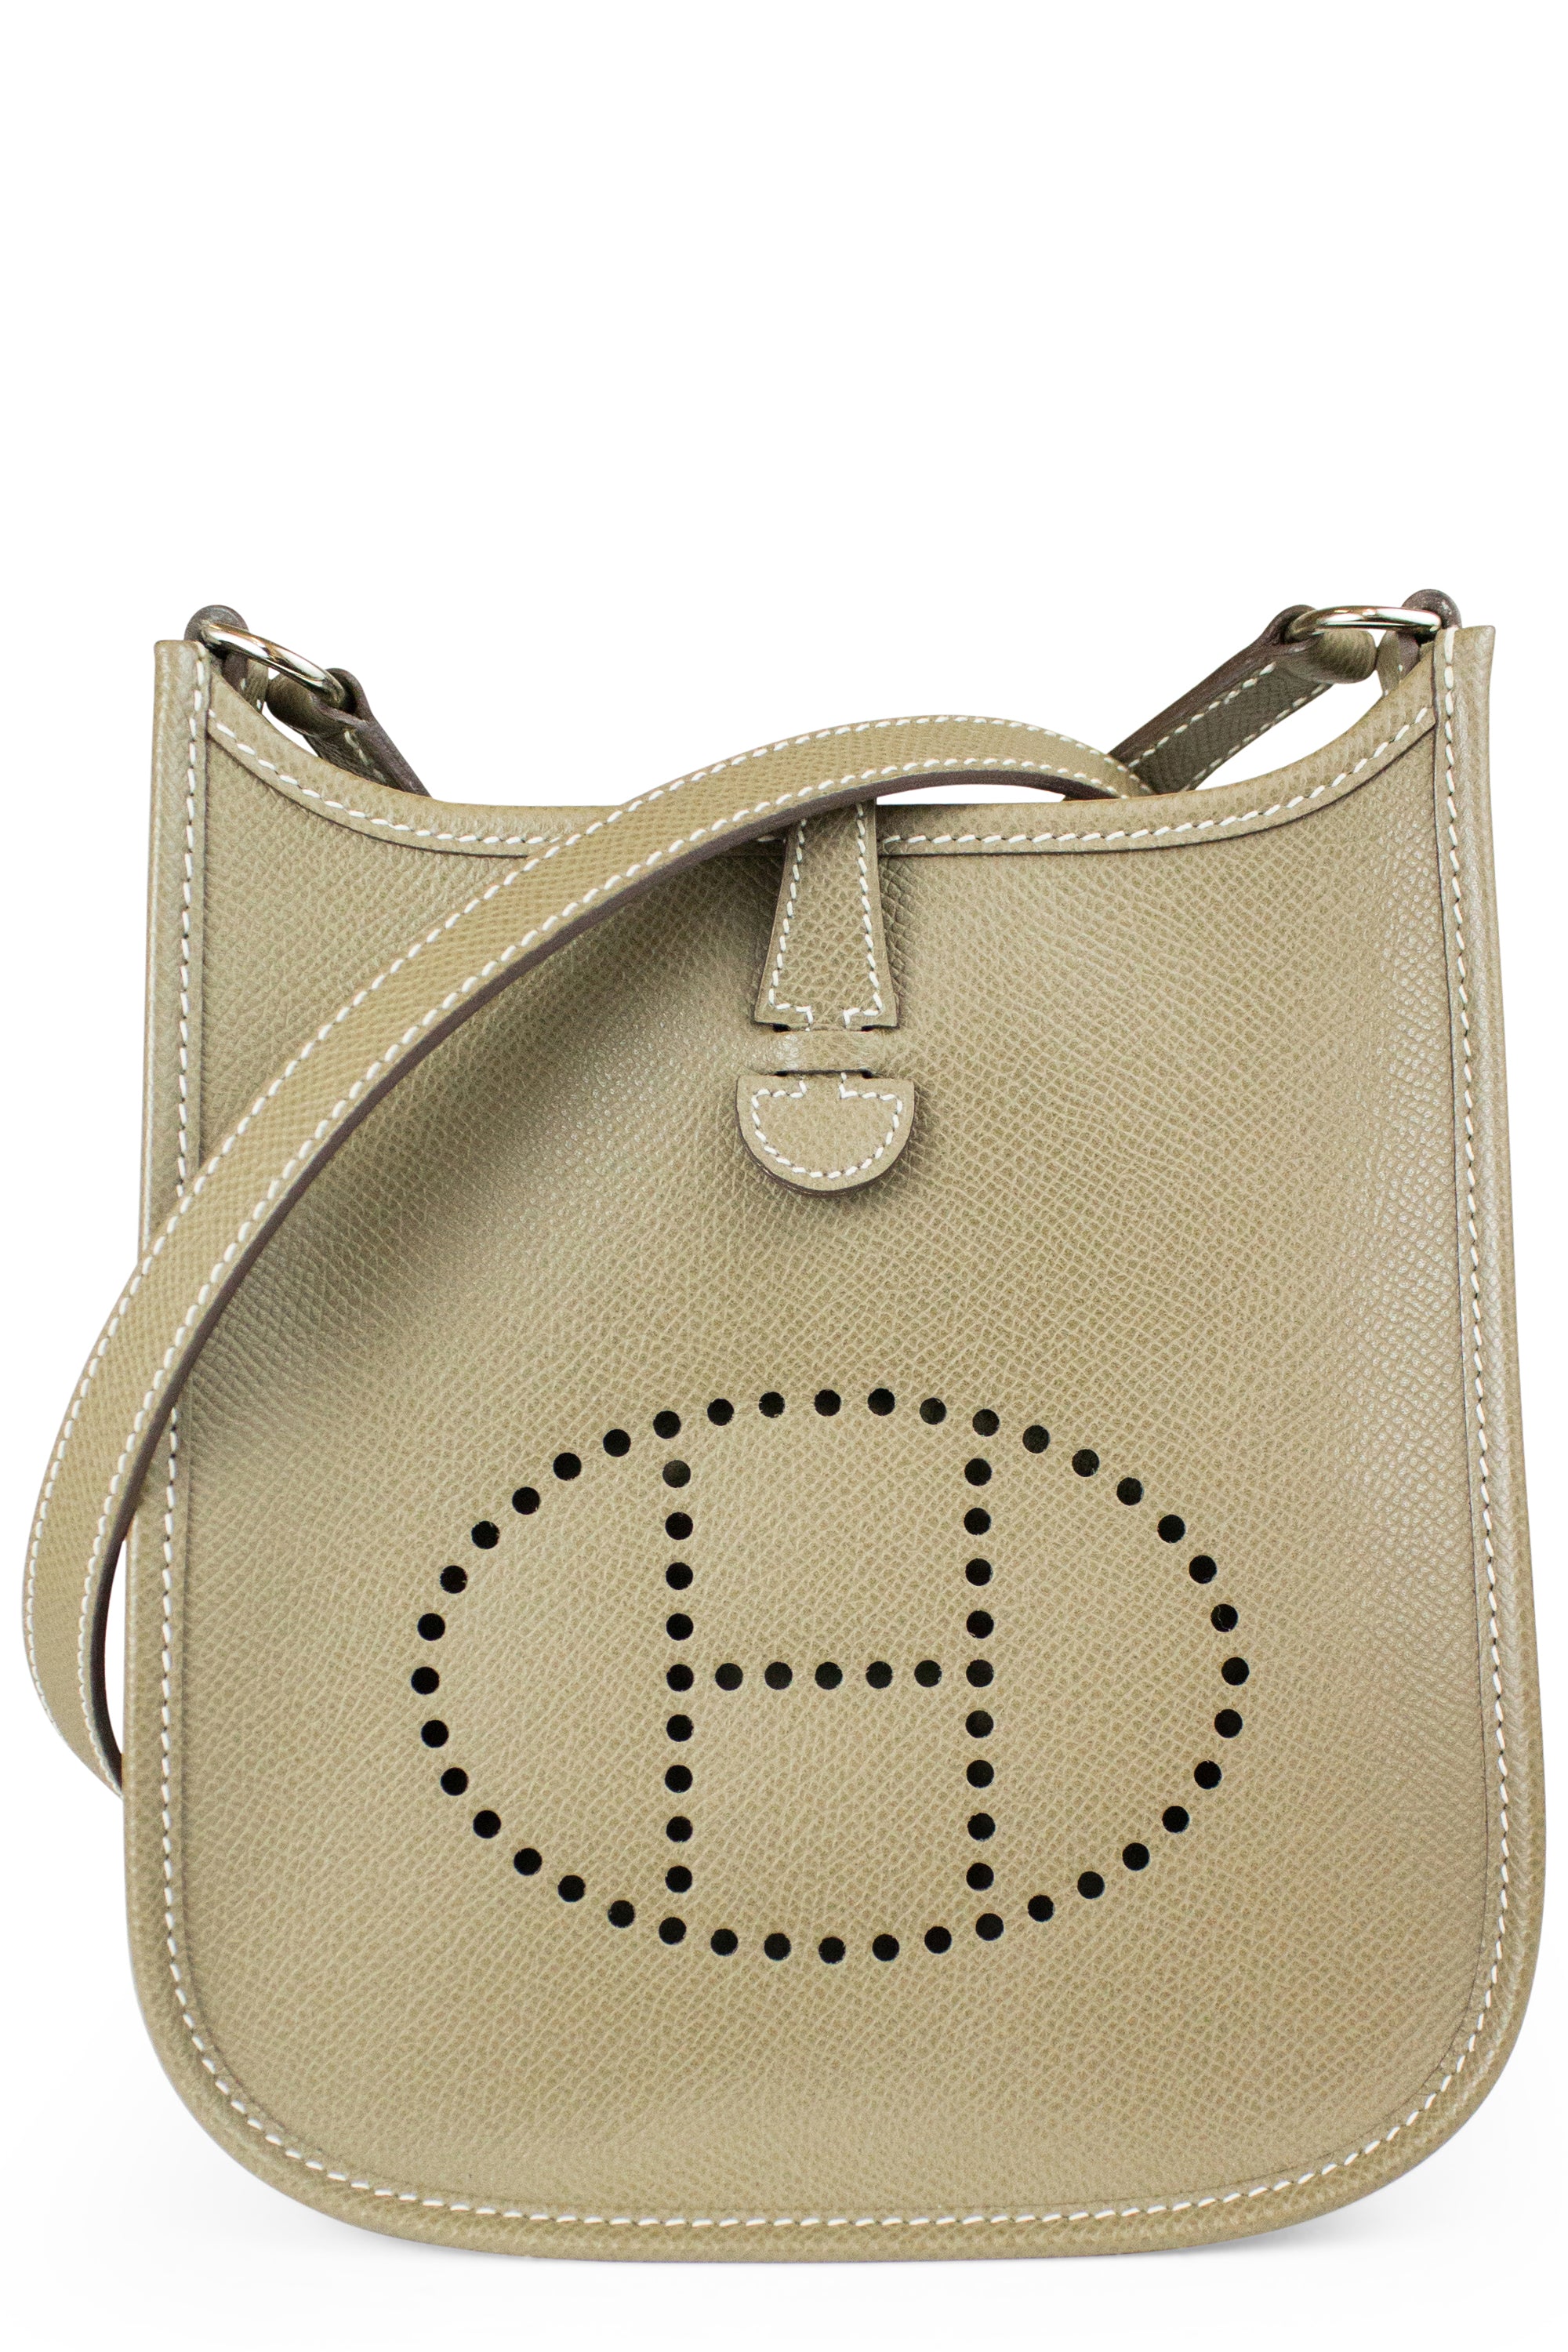 hermes tasche evelyn taupe